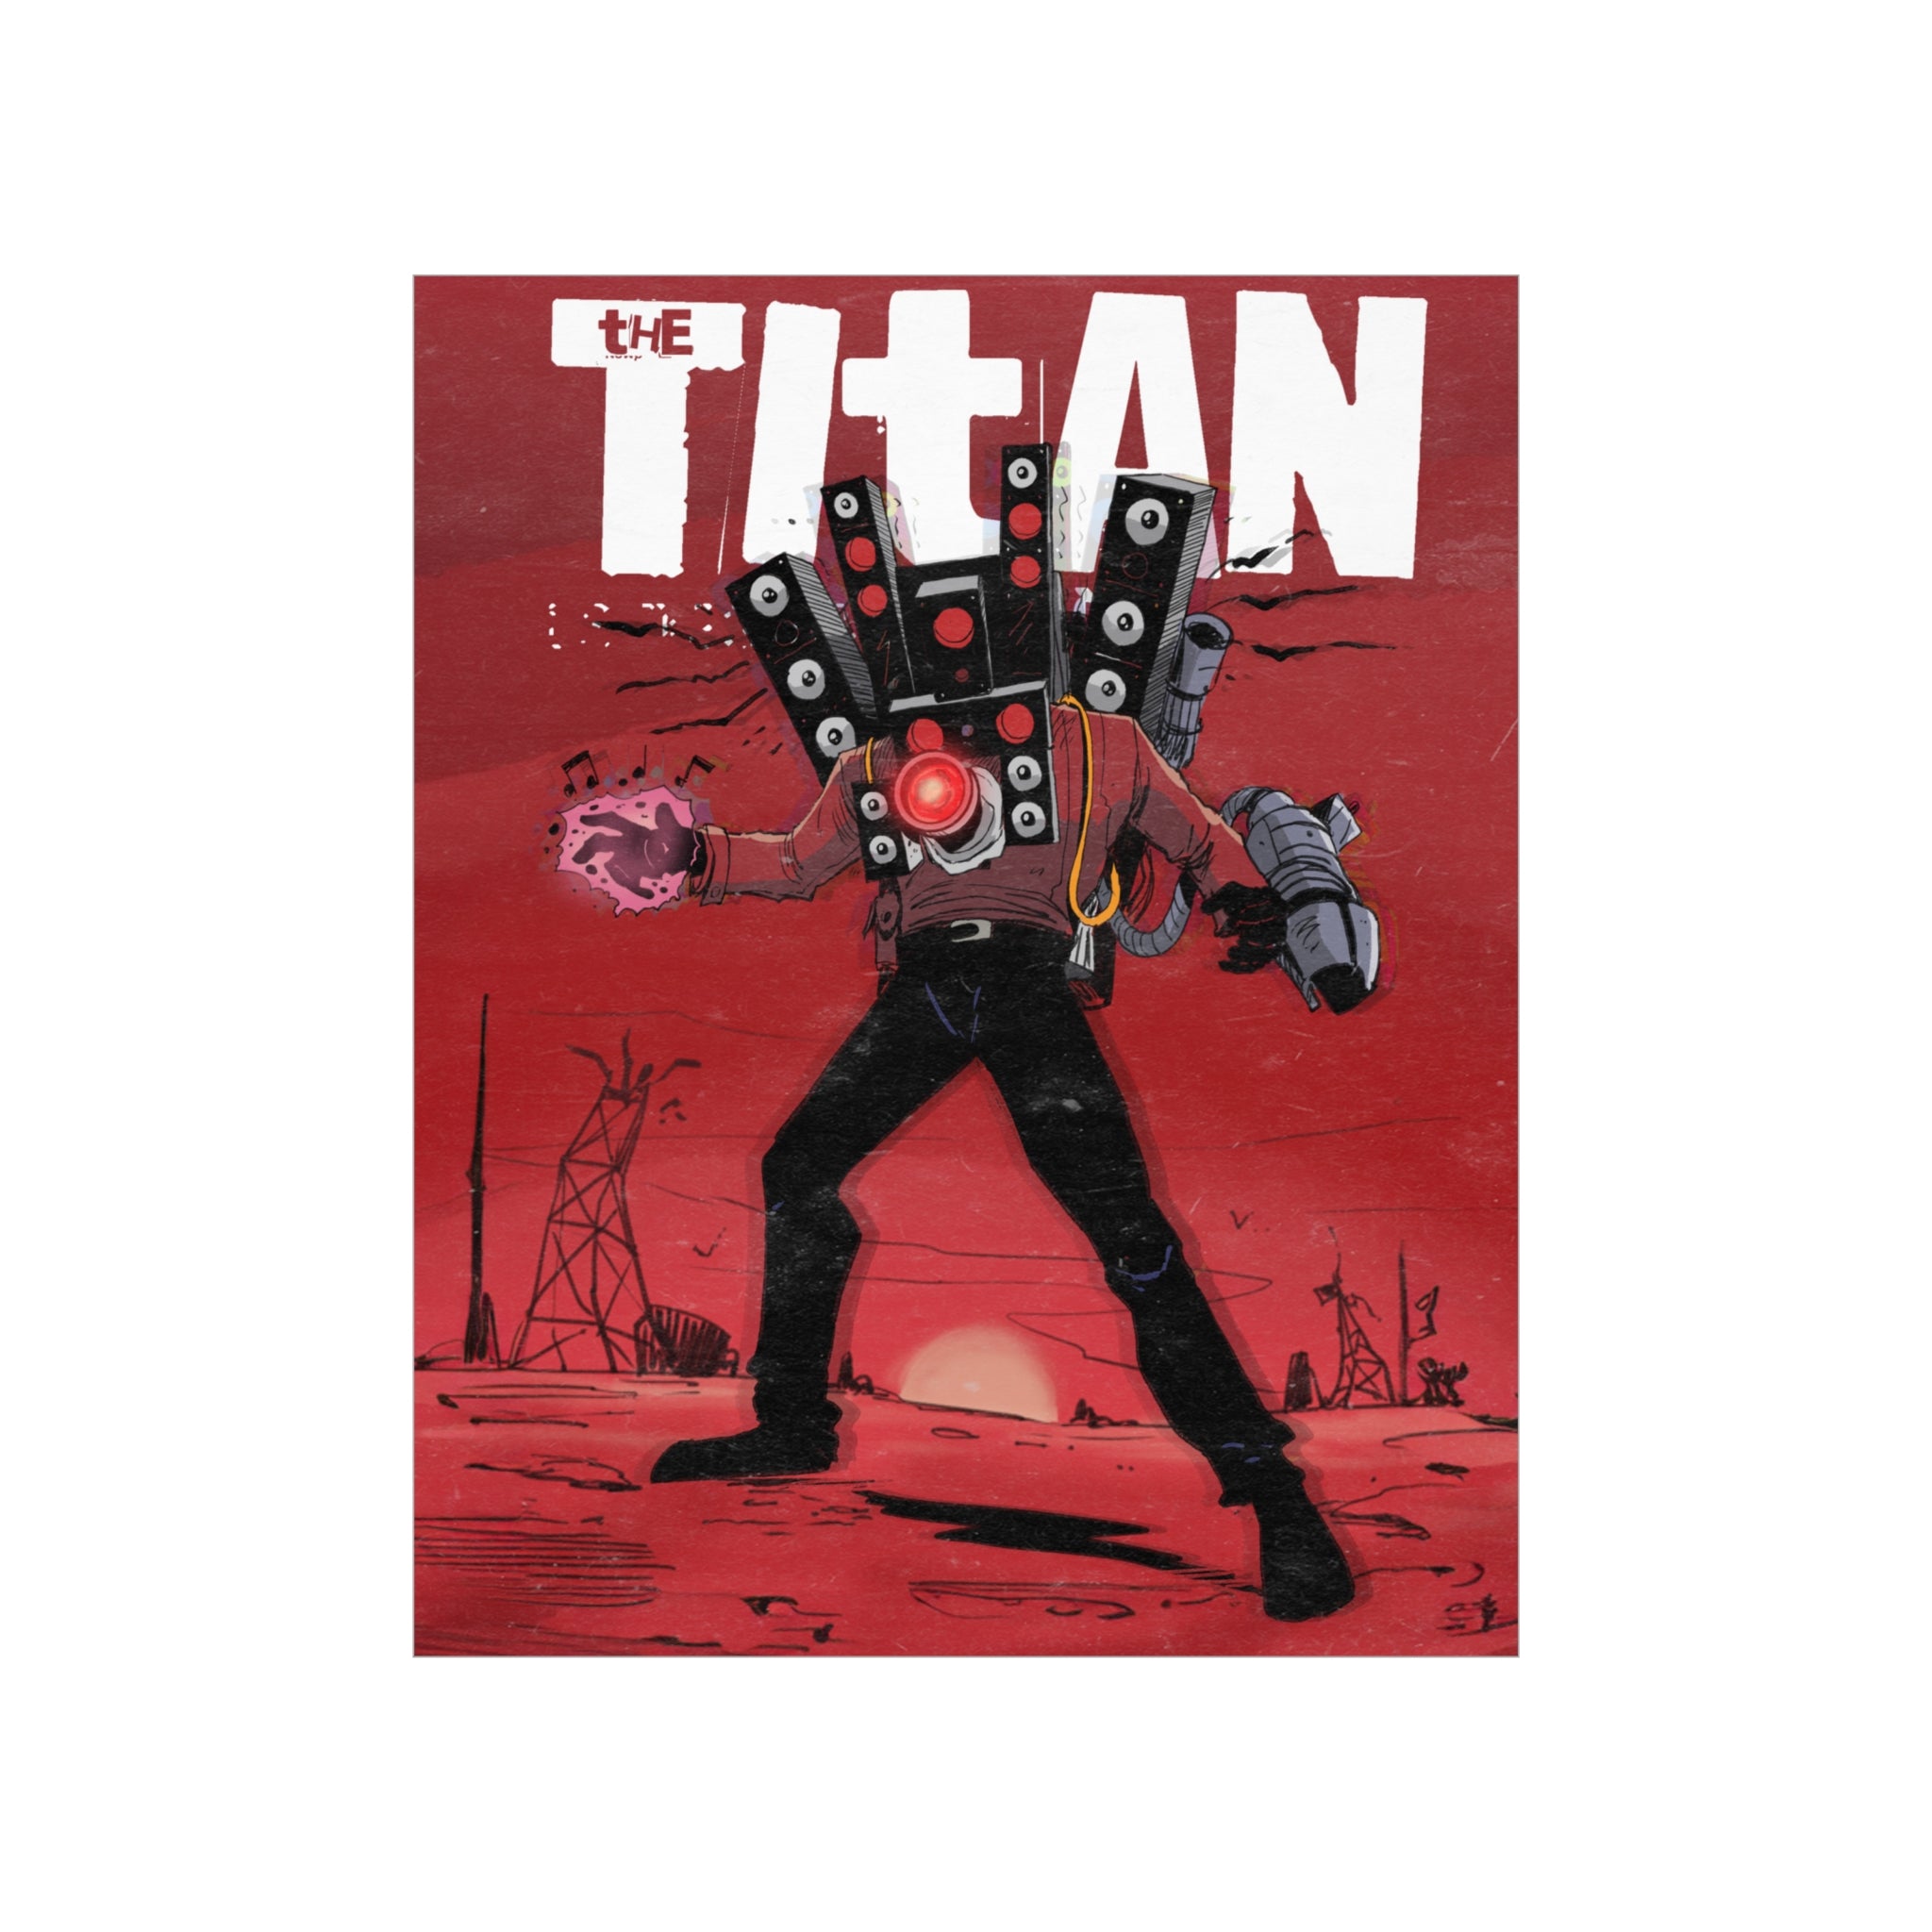 Artistic poster of Titan Speakerman against a red background.